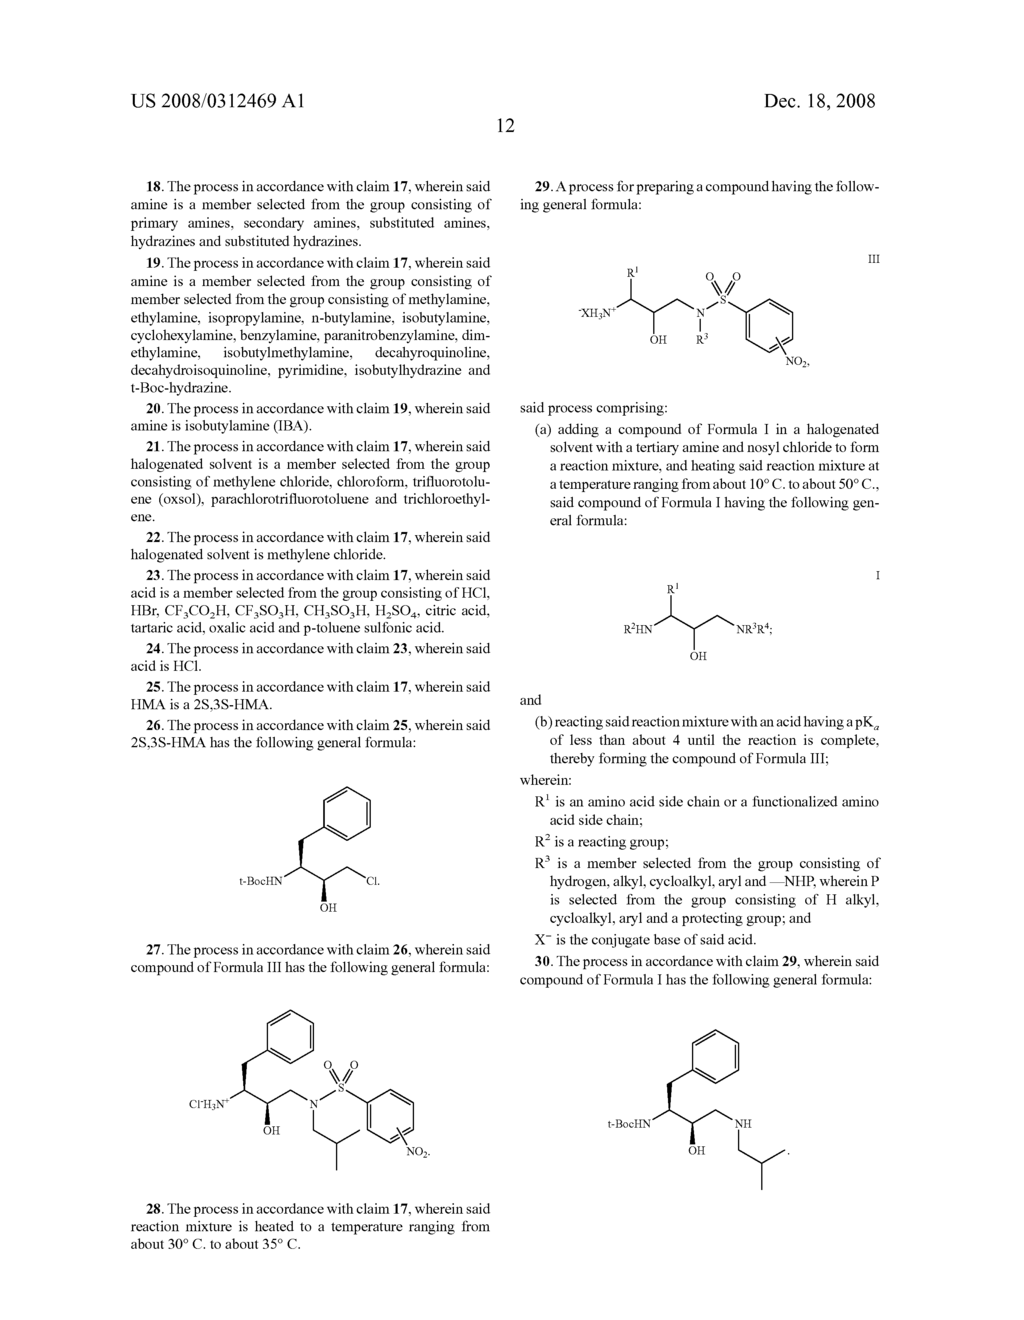 PREPARATION OF 2S,3S-N-ISOBUTYL-N-(2-HYDROXY-3-AMINO-4-PHENYLBUTYL)-P-NITROBENZENESULFONYLAMIDE HYDROCHLORIDE AND OTHER DERIVATIVES OF 2-HYDROXY-1,3-DIAMINES - diagram, schematic, and image 14